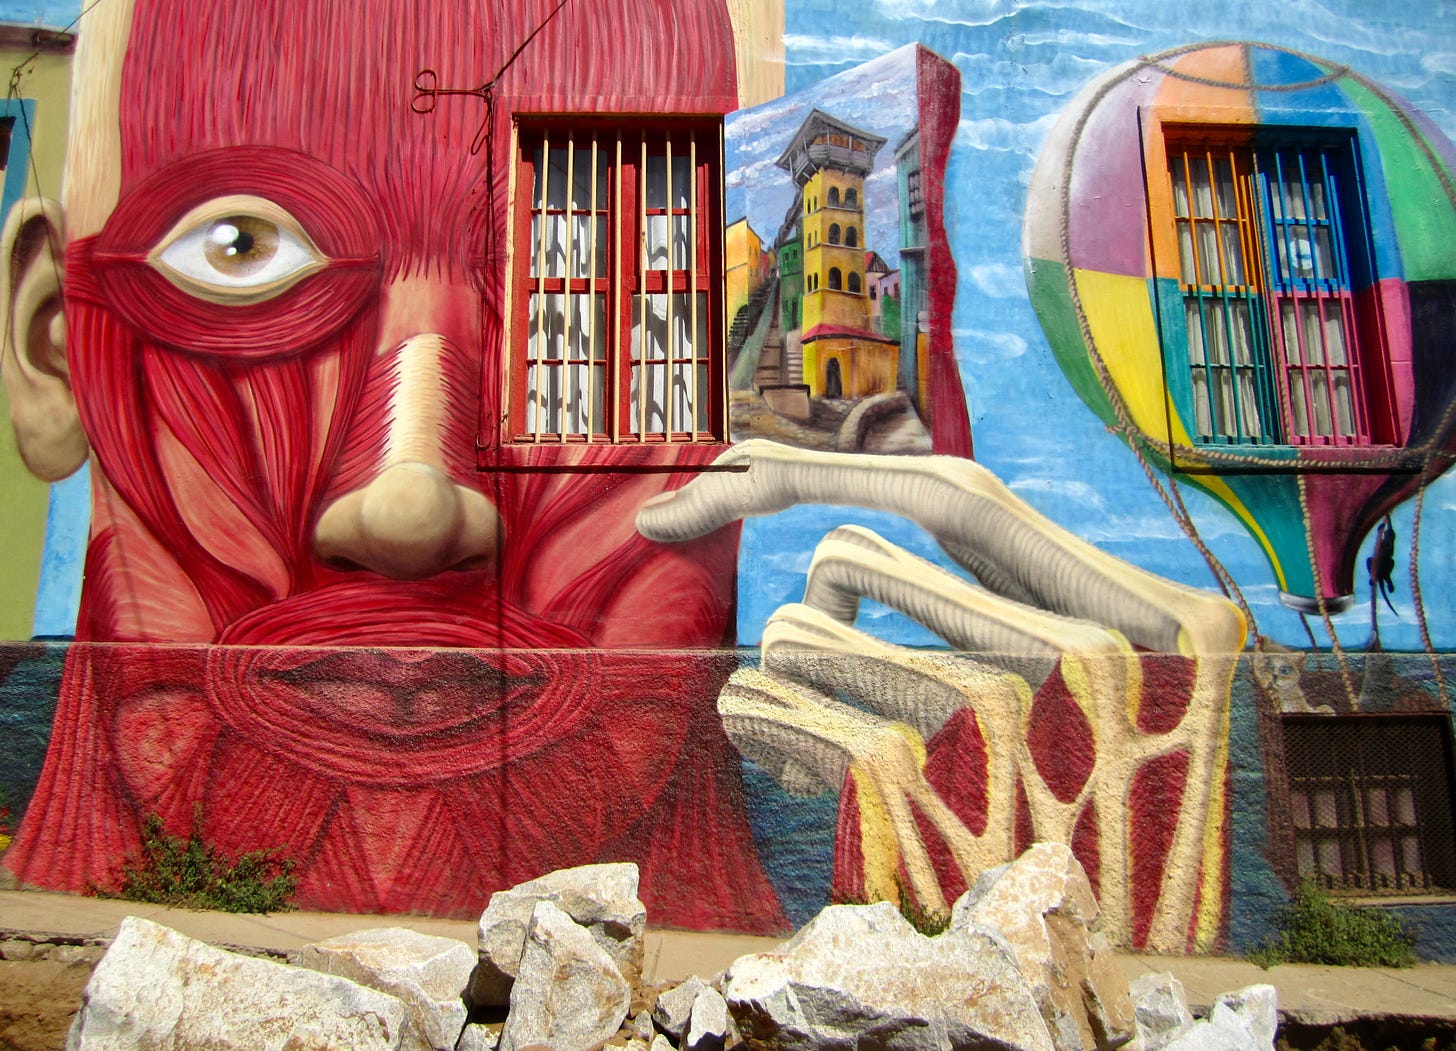 Mural on wall, Valparaiso, Chile